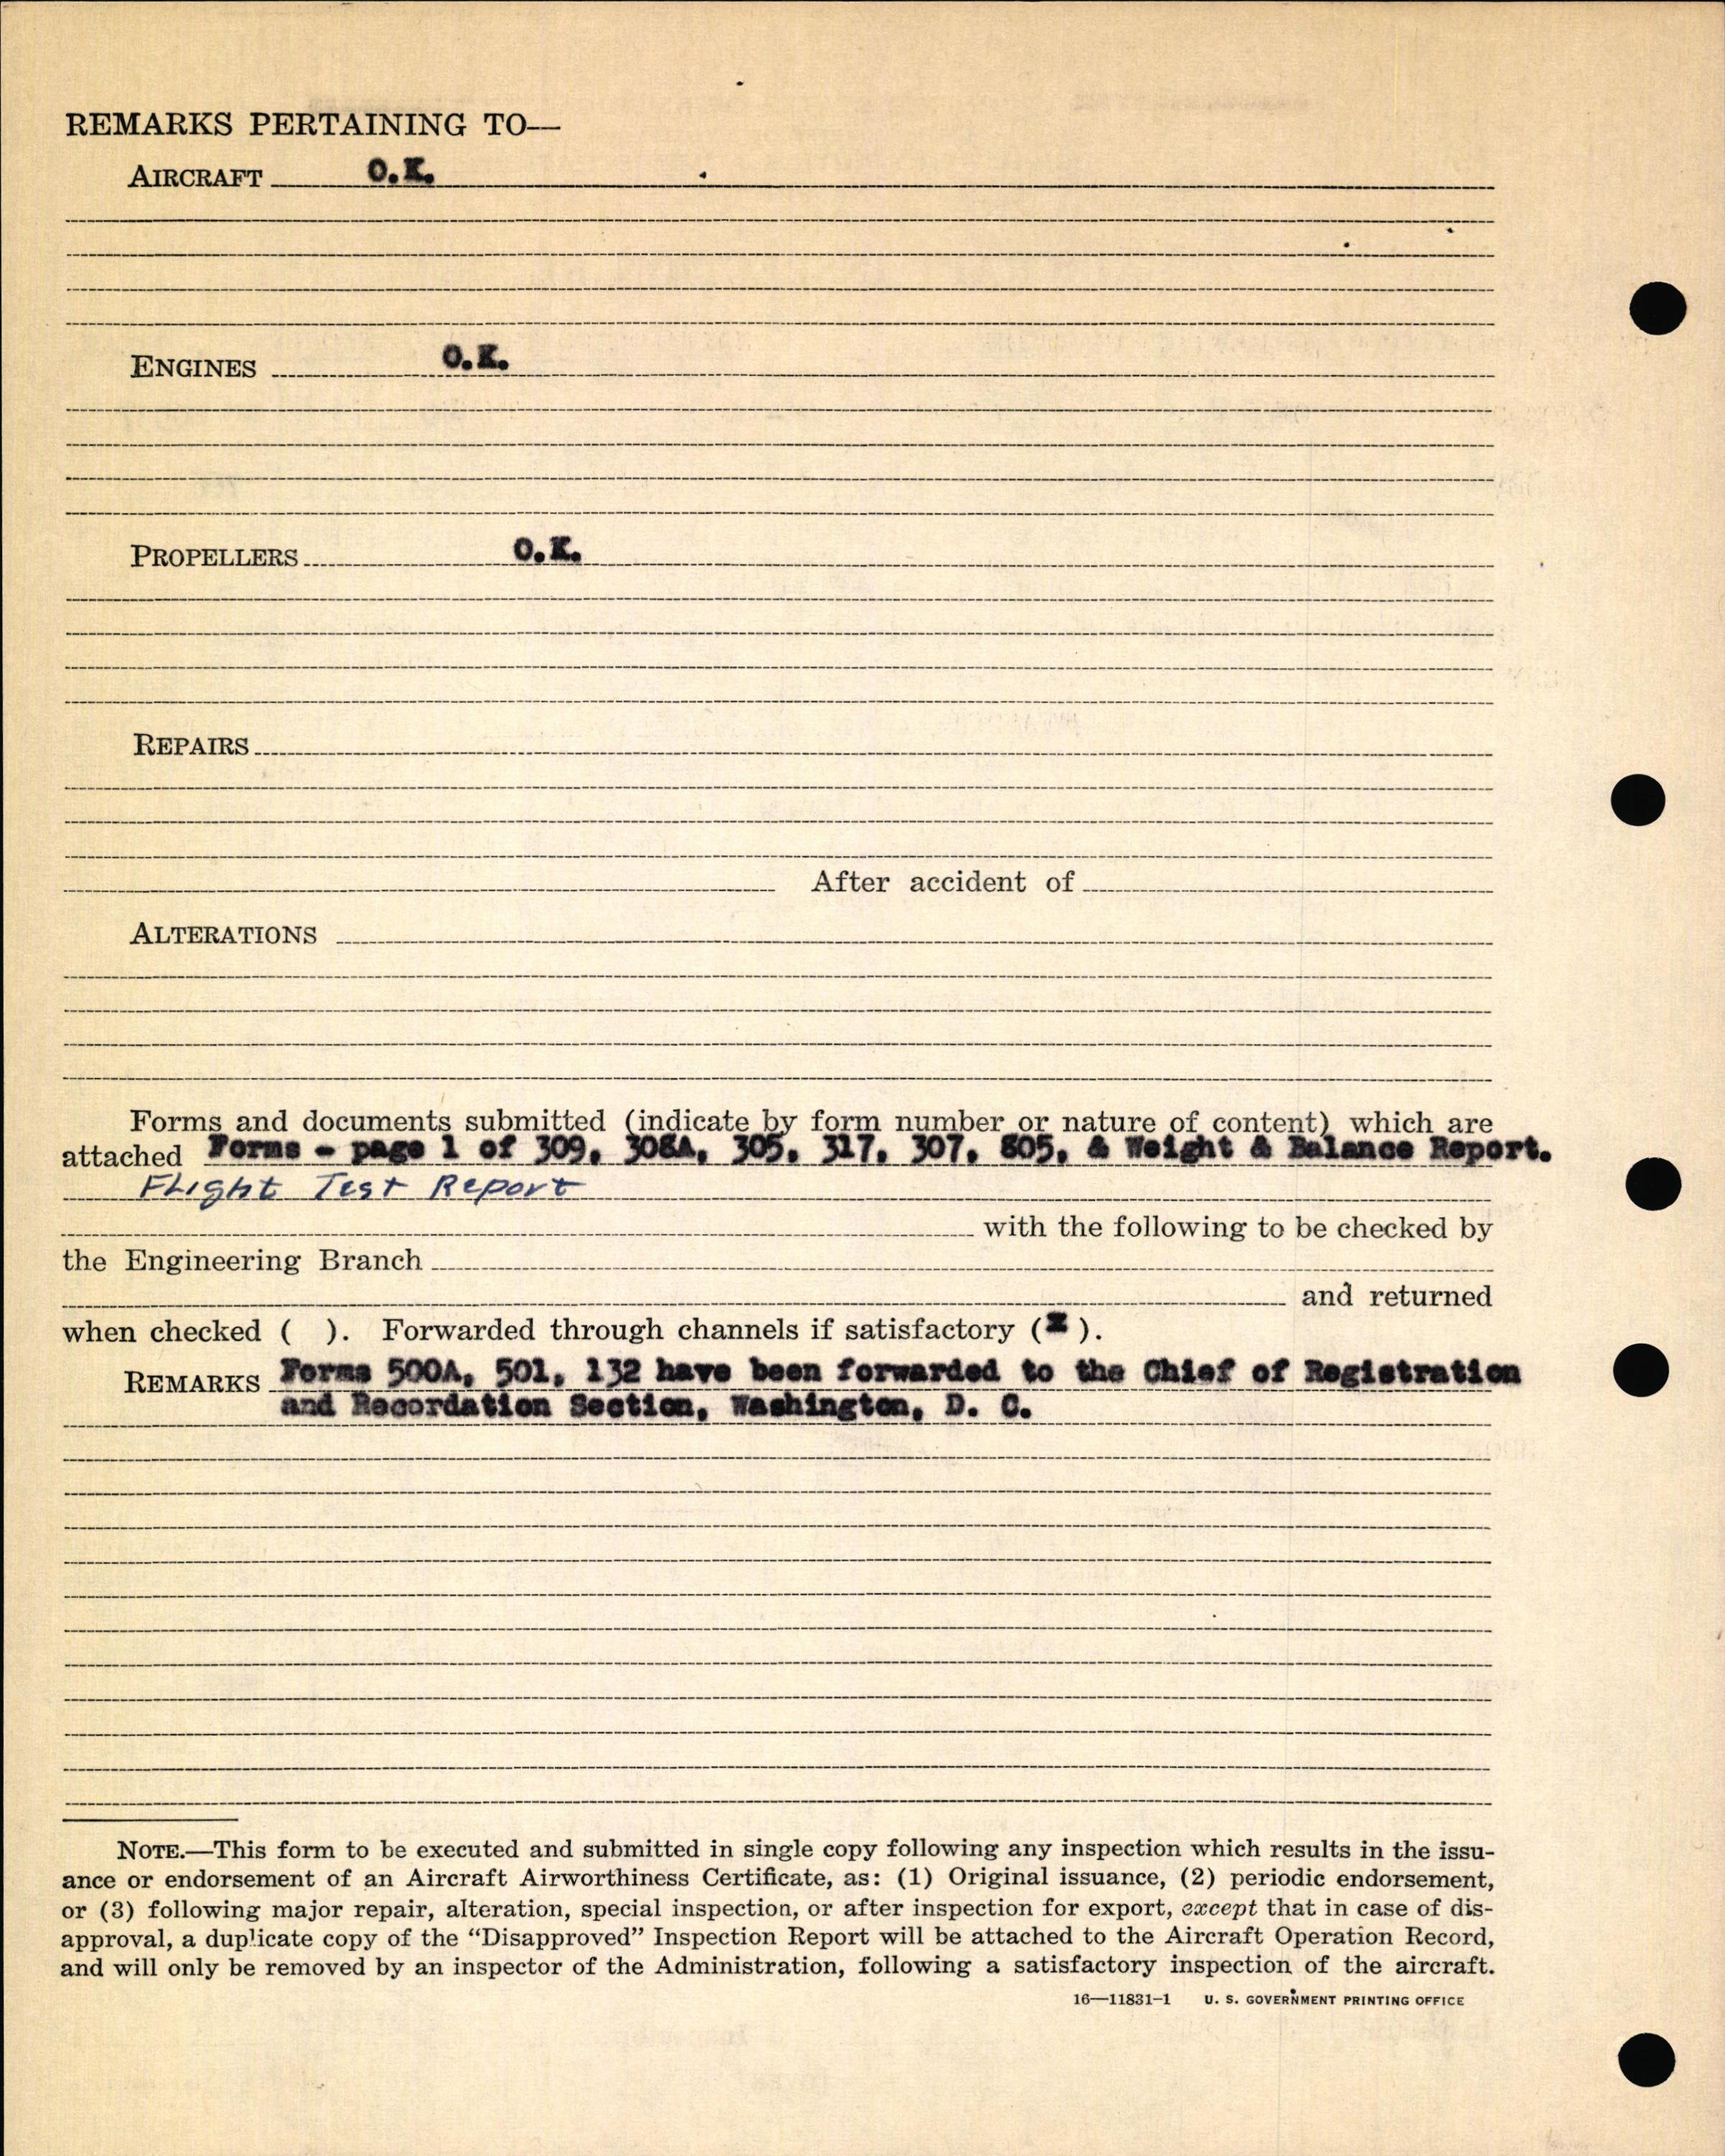 Sample page 6 from AirCorps Library document: Technical Information for Serial Number 40